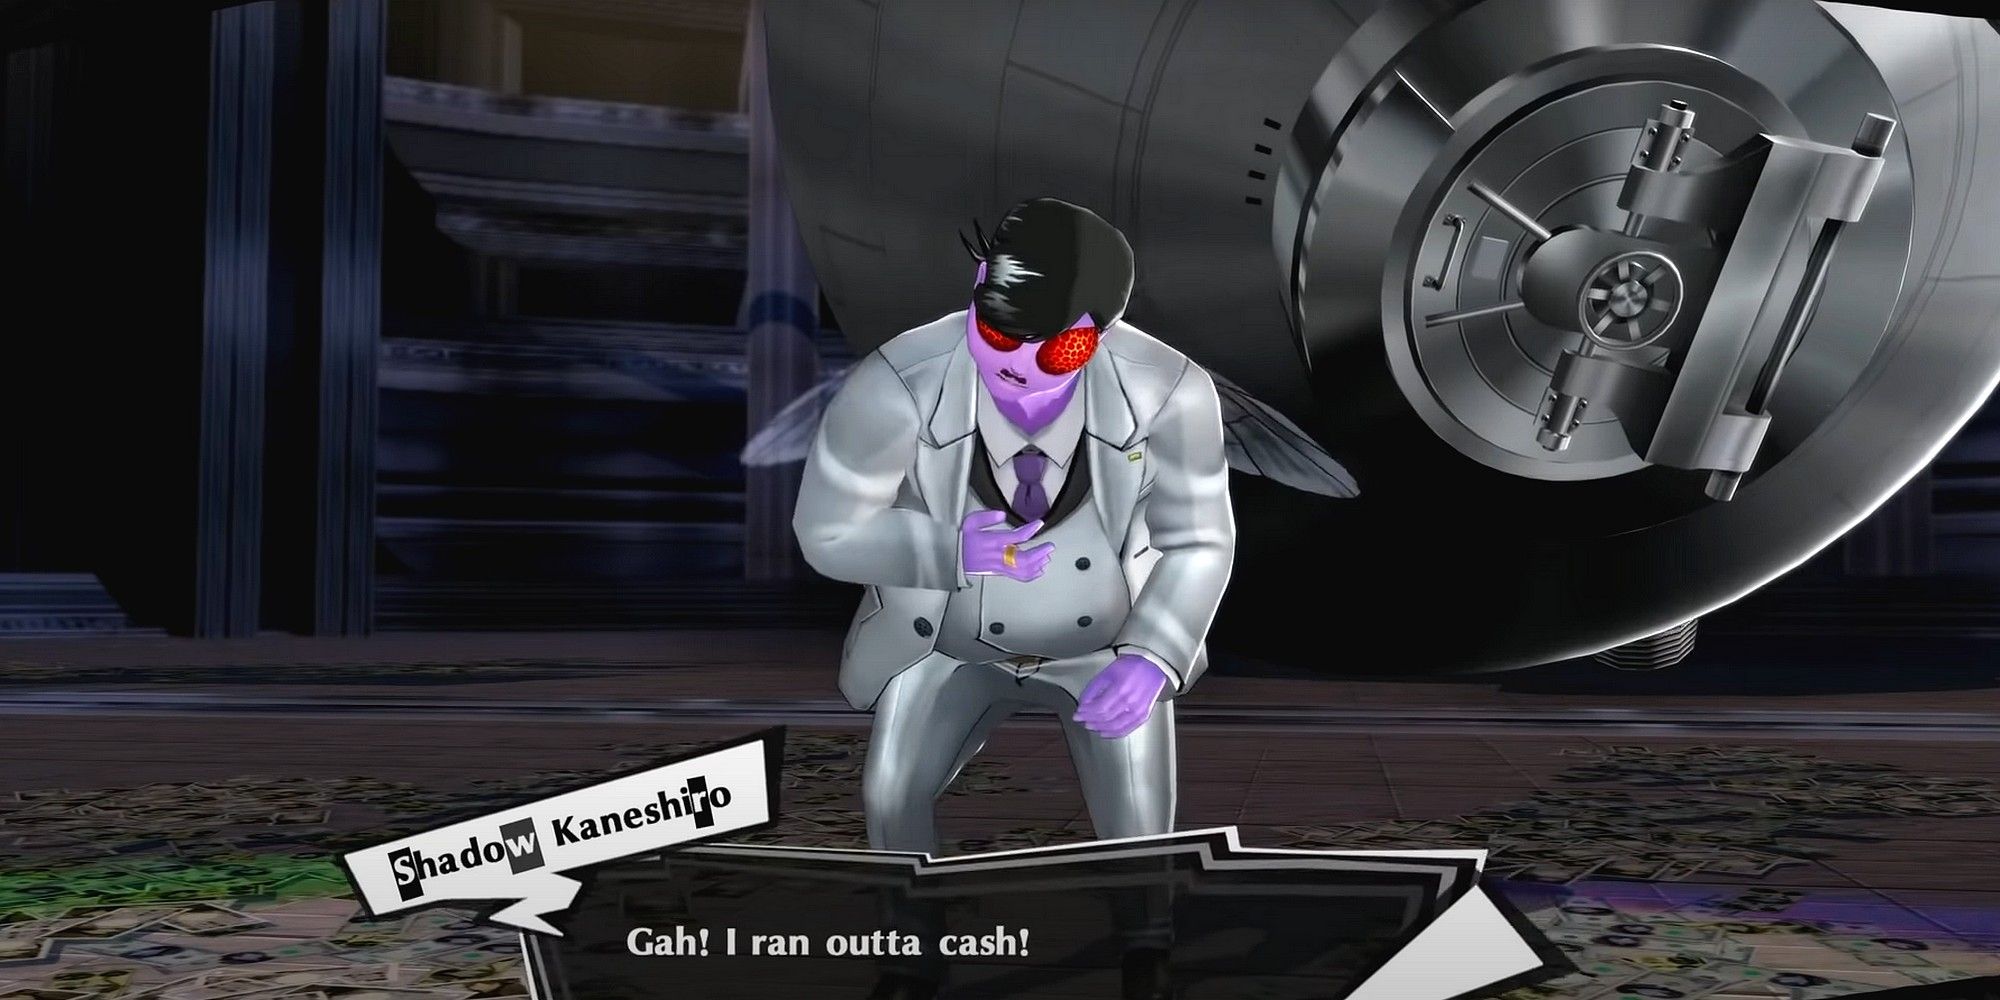 shadow kaneshiro out of money after making it rain